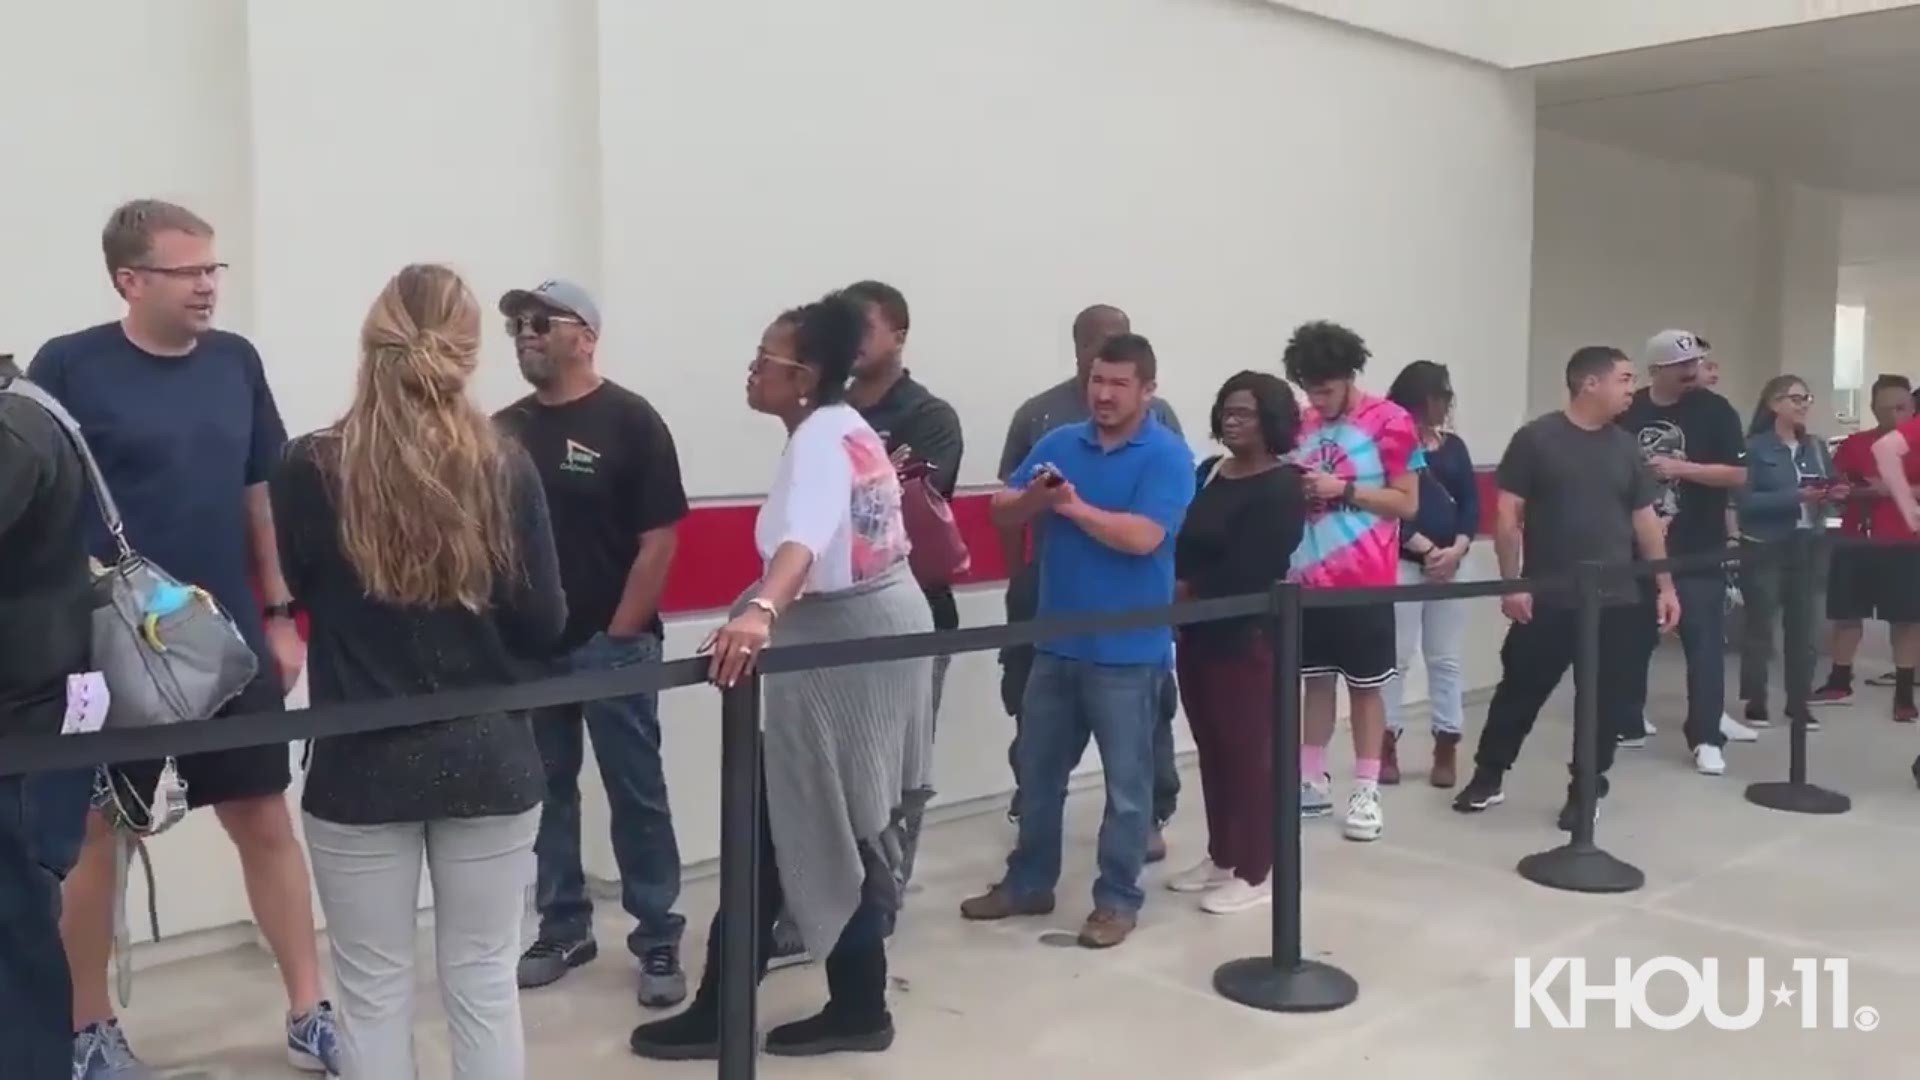 California-based In-N-Out opened its doors Friday morning at two locations in the Houston area. There's been a steady line of customers at the Stafford location.